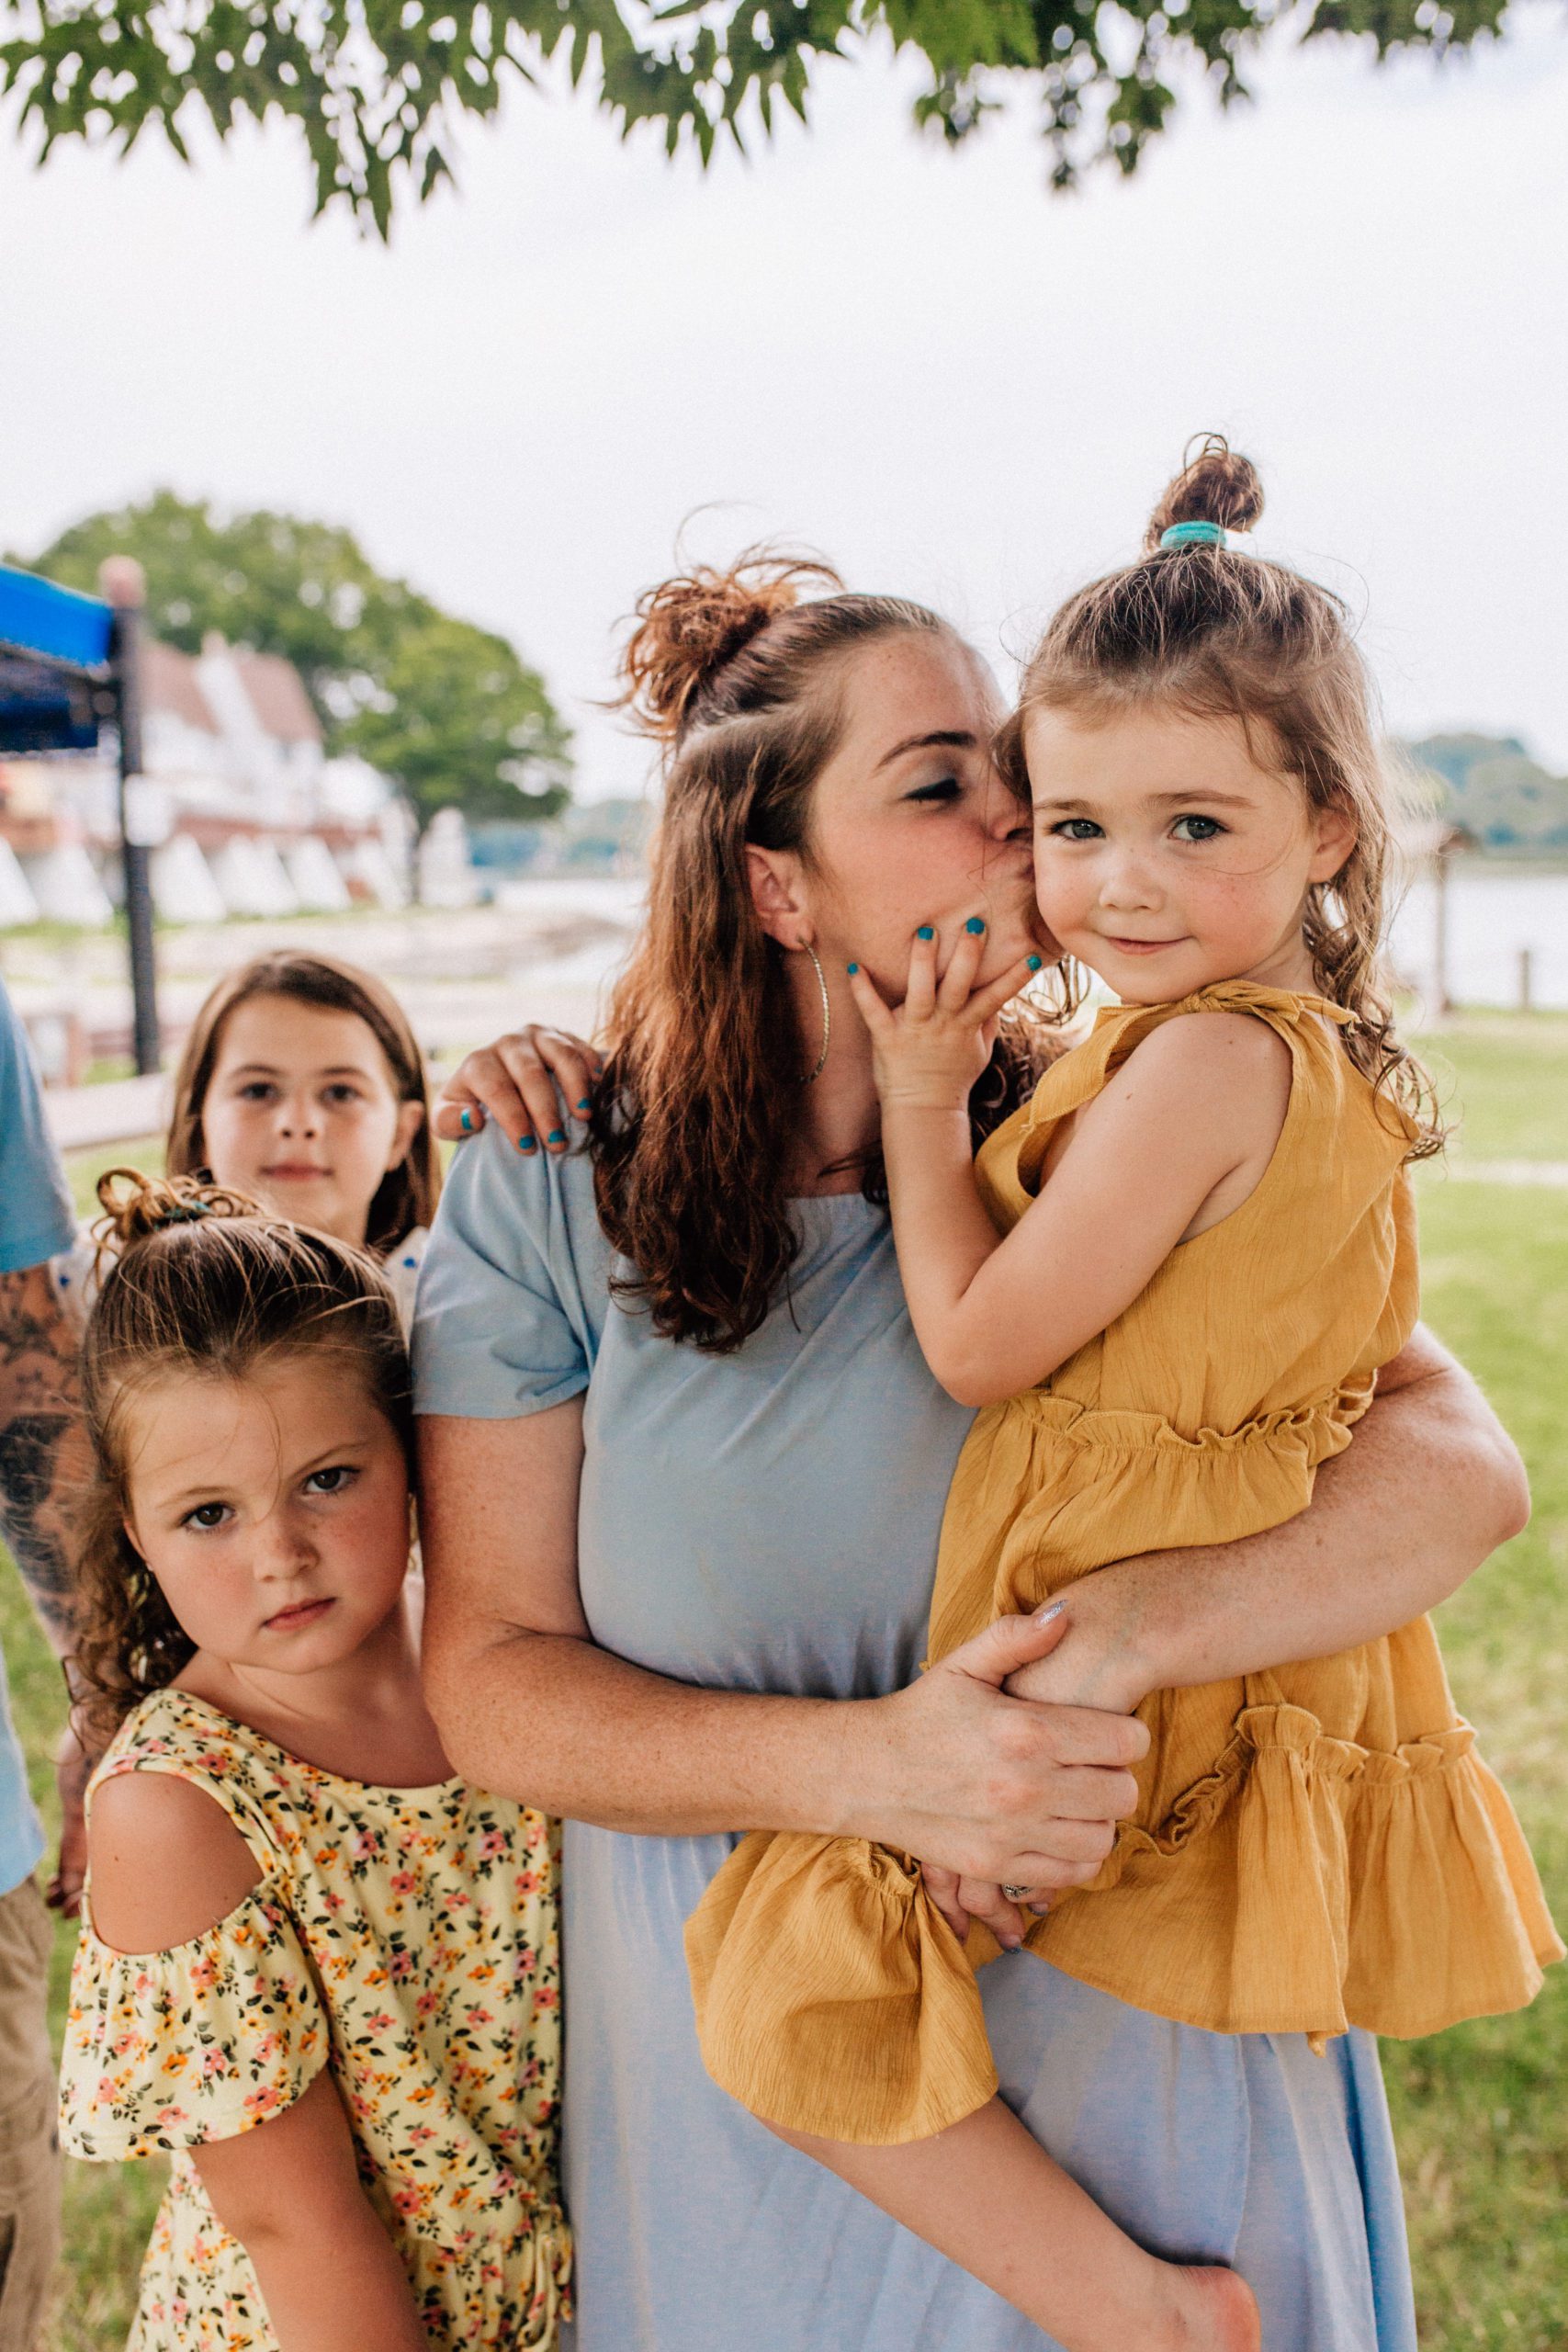 mother holding her daughter and kissing her on the cheek as her other children surround her